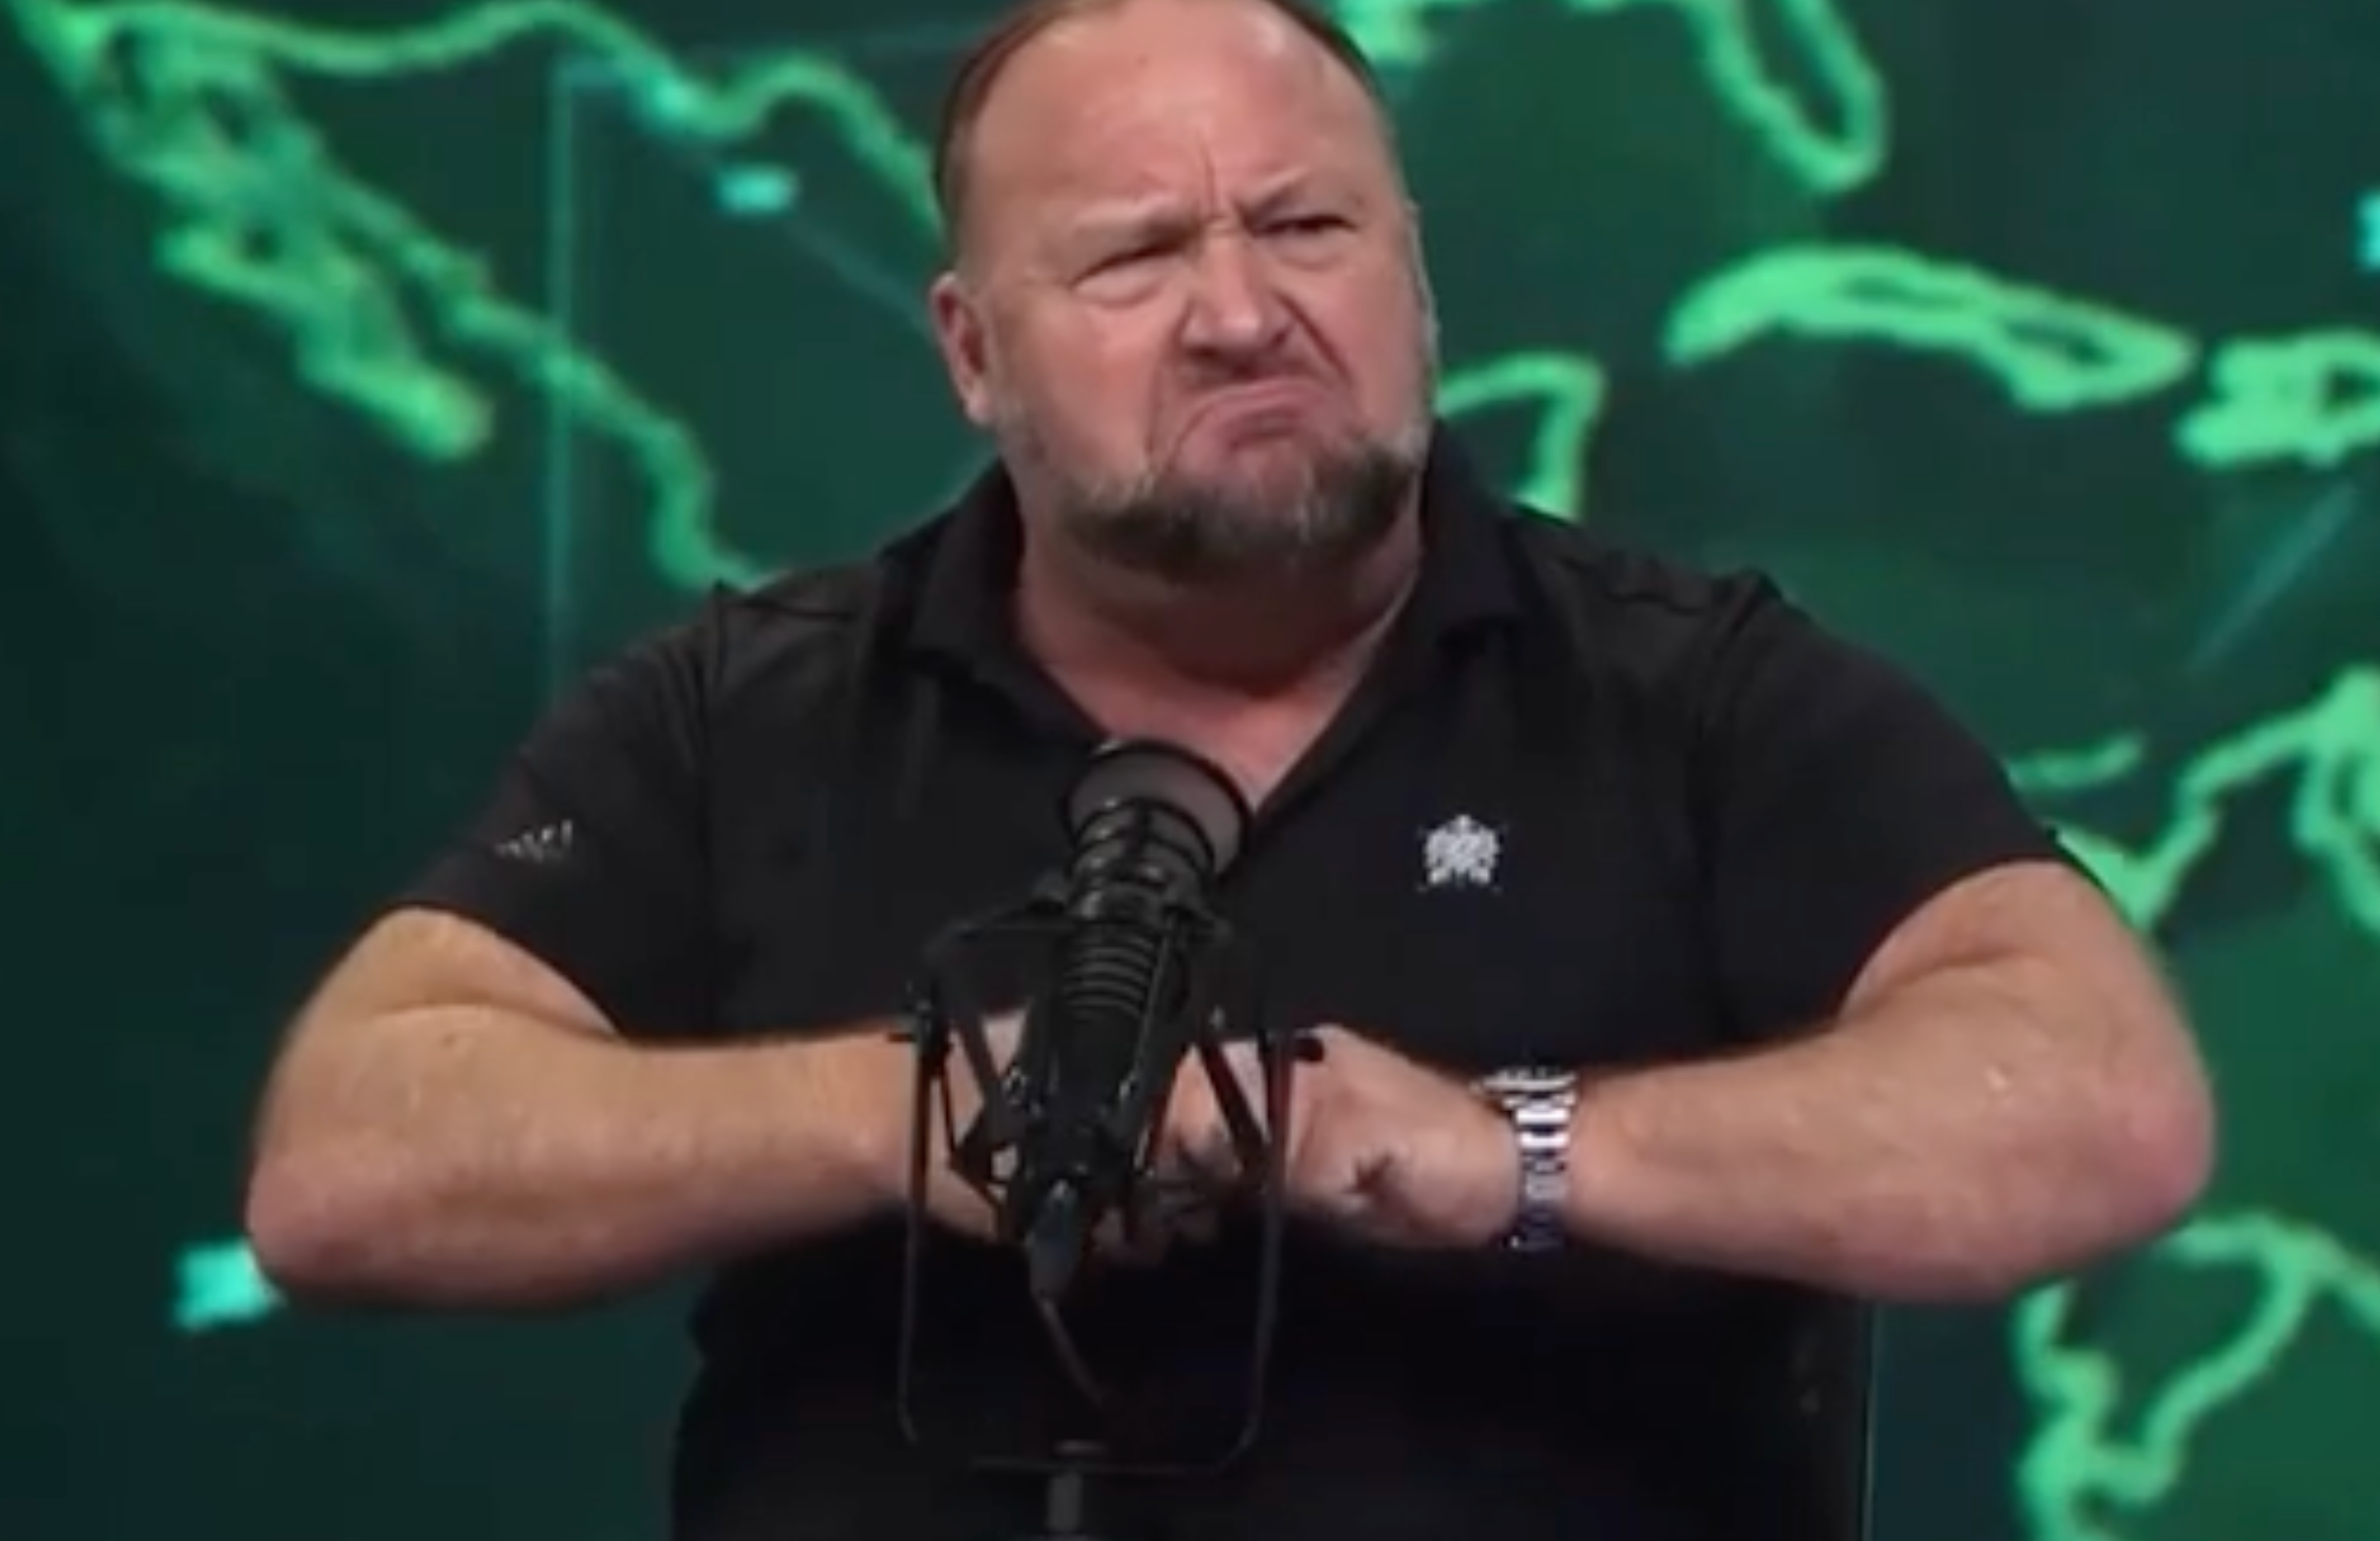 Alex Jones claims he is the victim of ‘show trials’